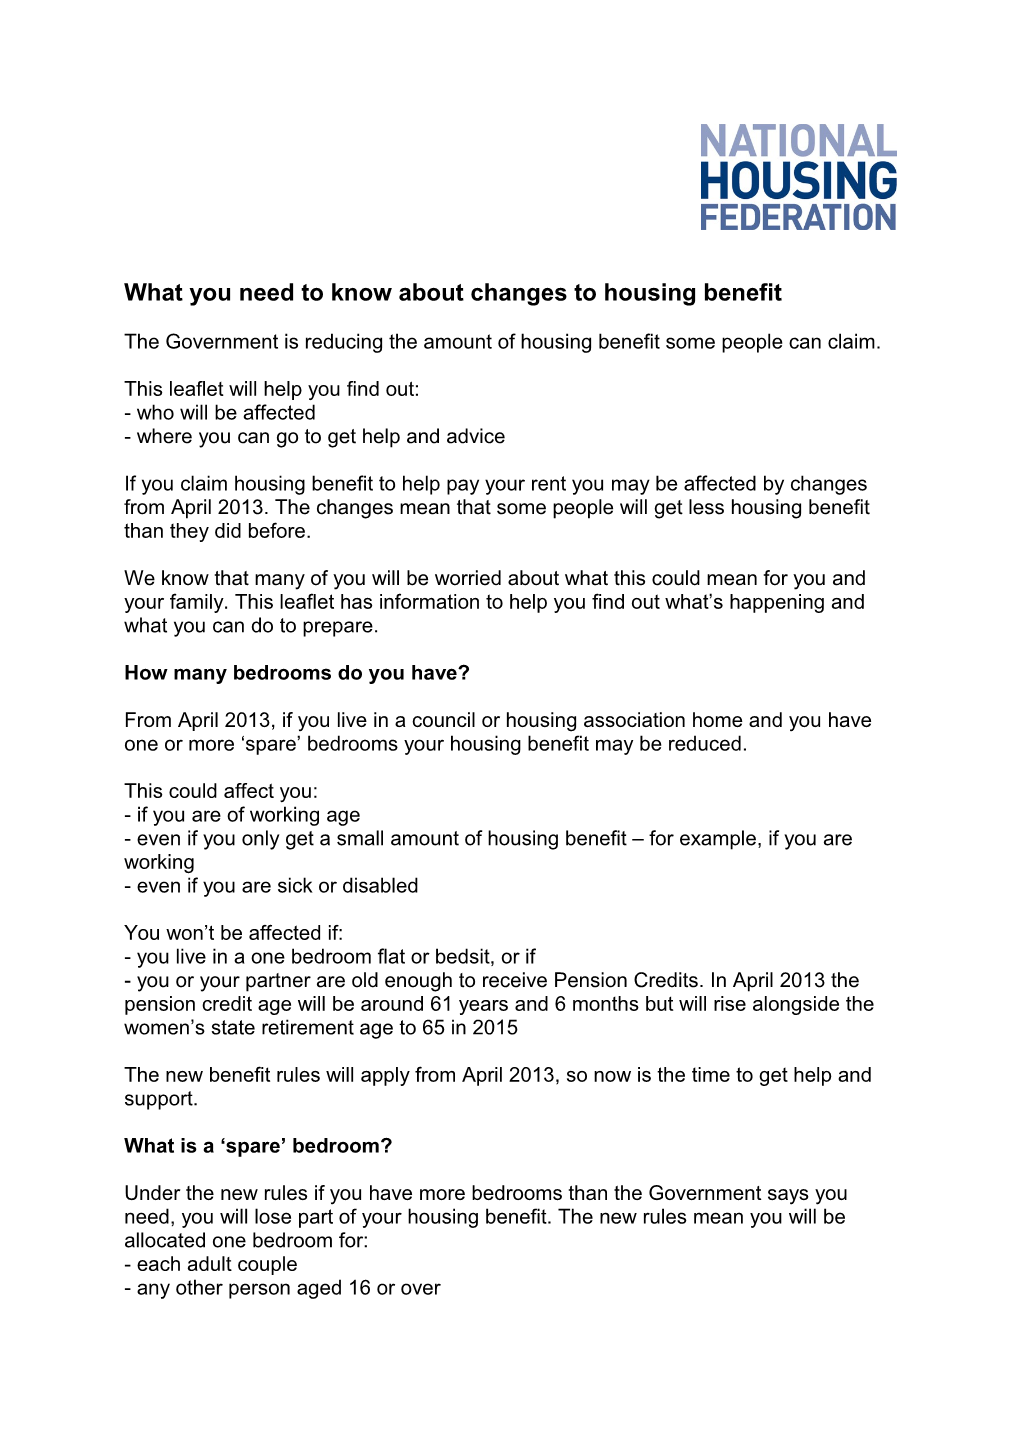 What You Need to Know About Changes to Housing Benefit